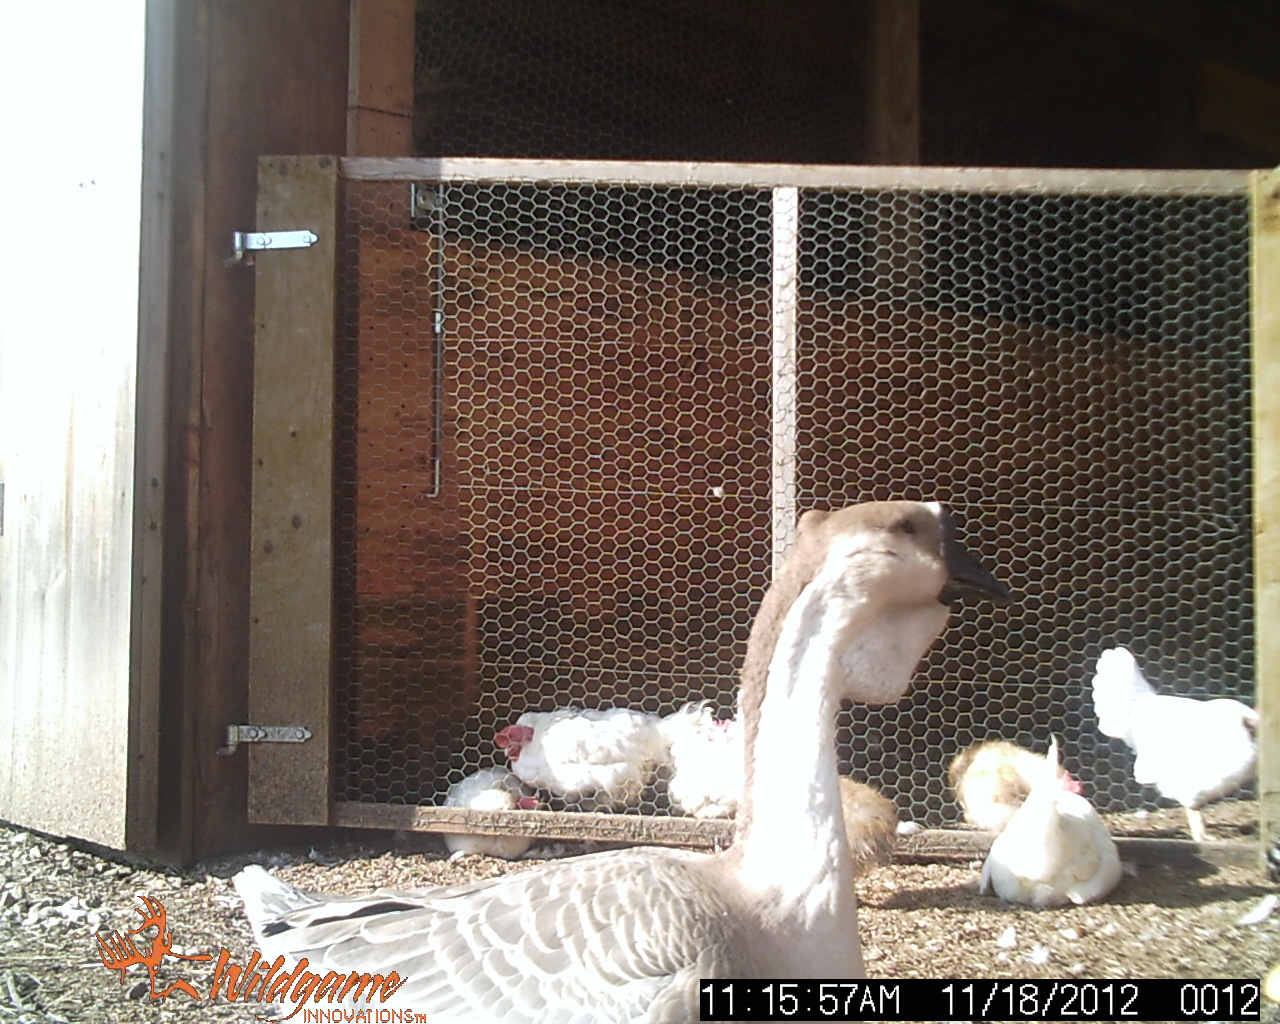 WVL
motion activated camera took this pic of my African goose